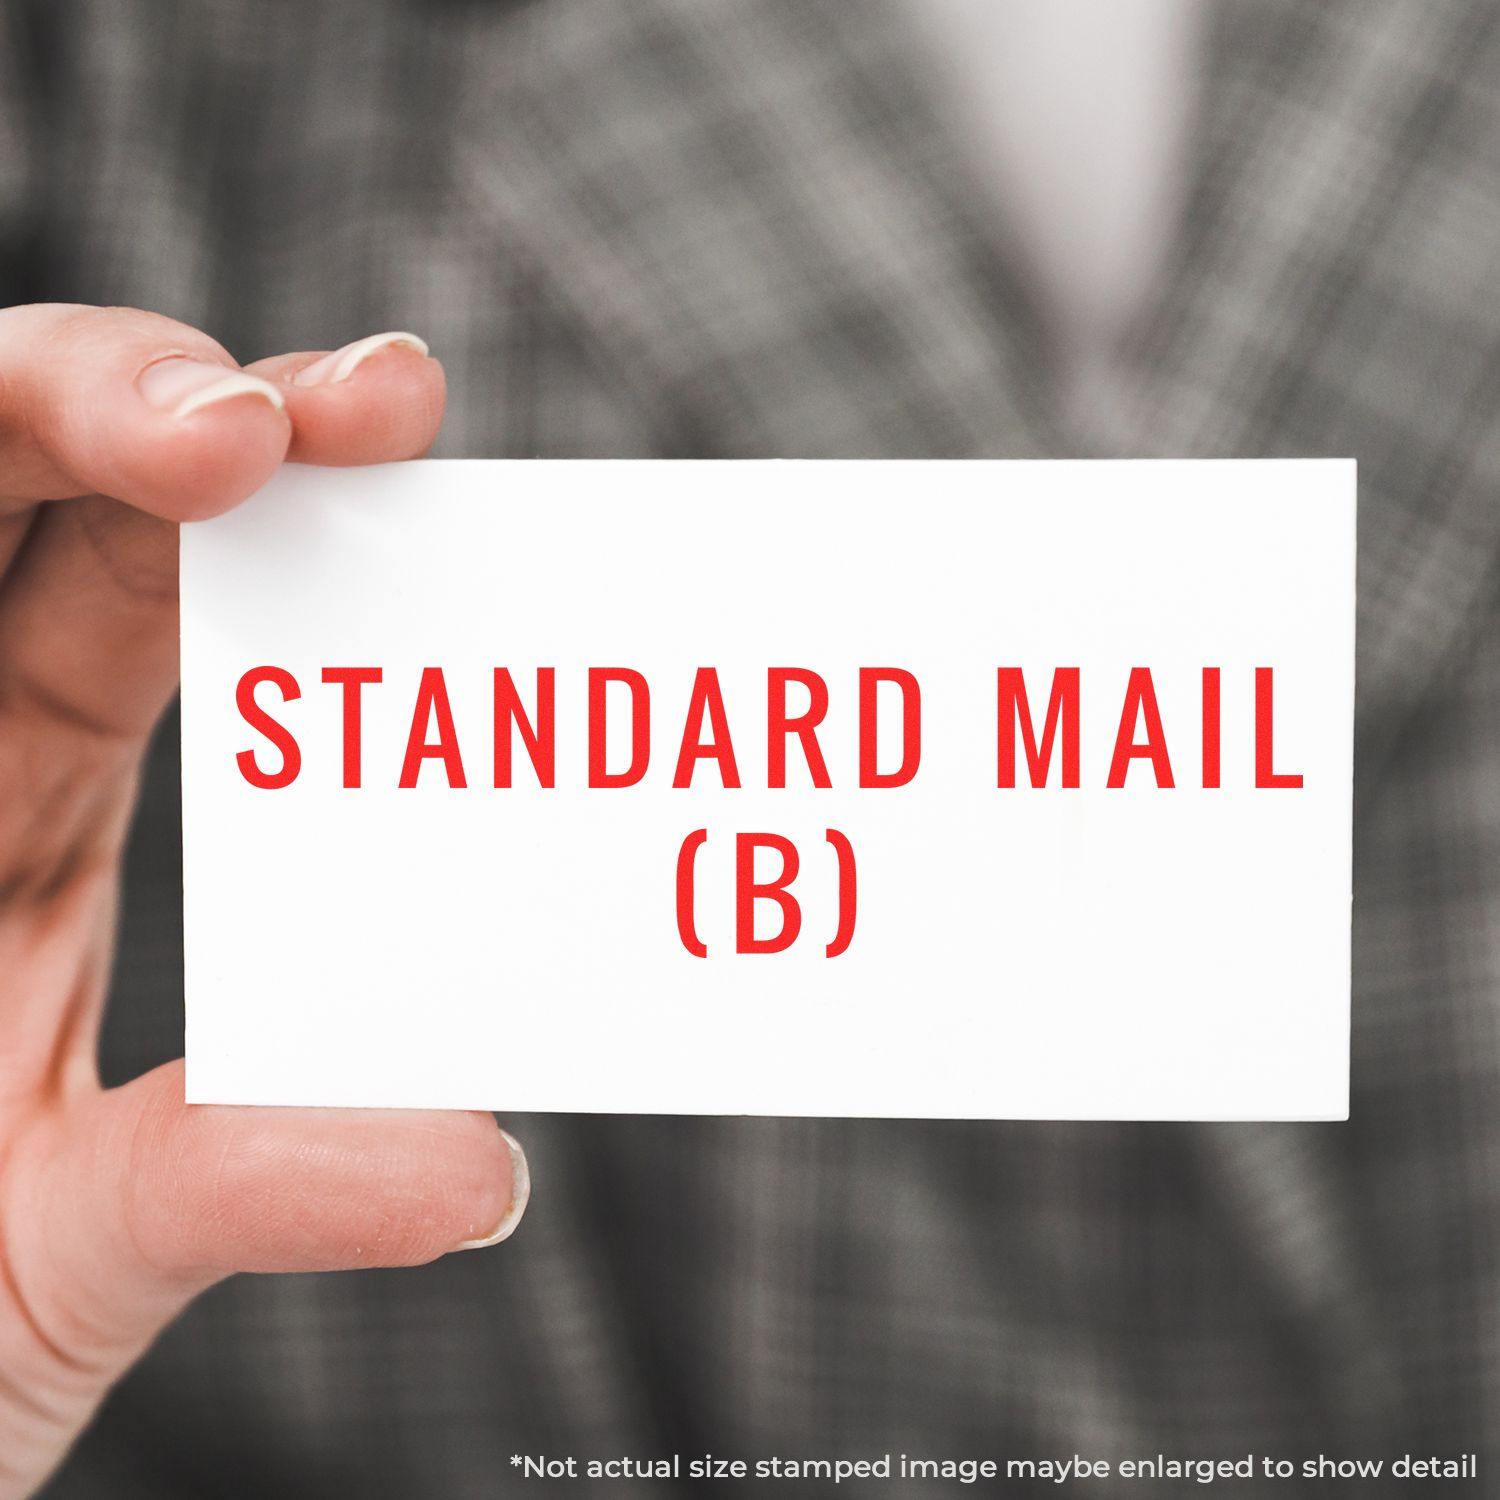 A stock office rubber stamp with a stamped image showing how the text "STANDARD MAIL (B)" in a large font is displayed after stamping.